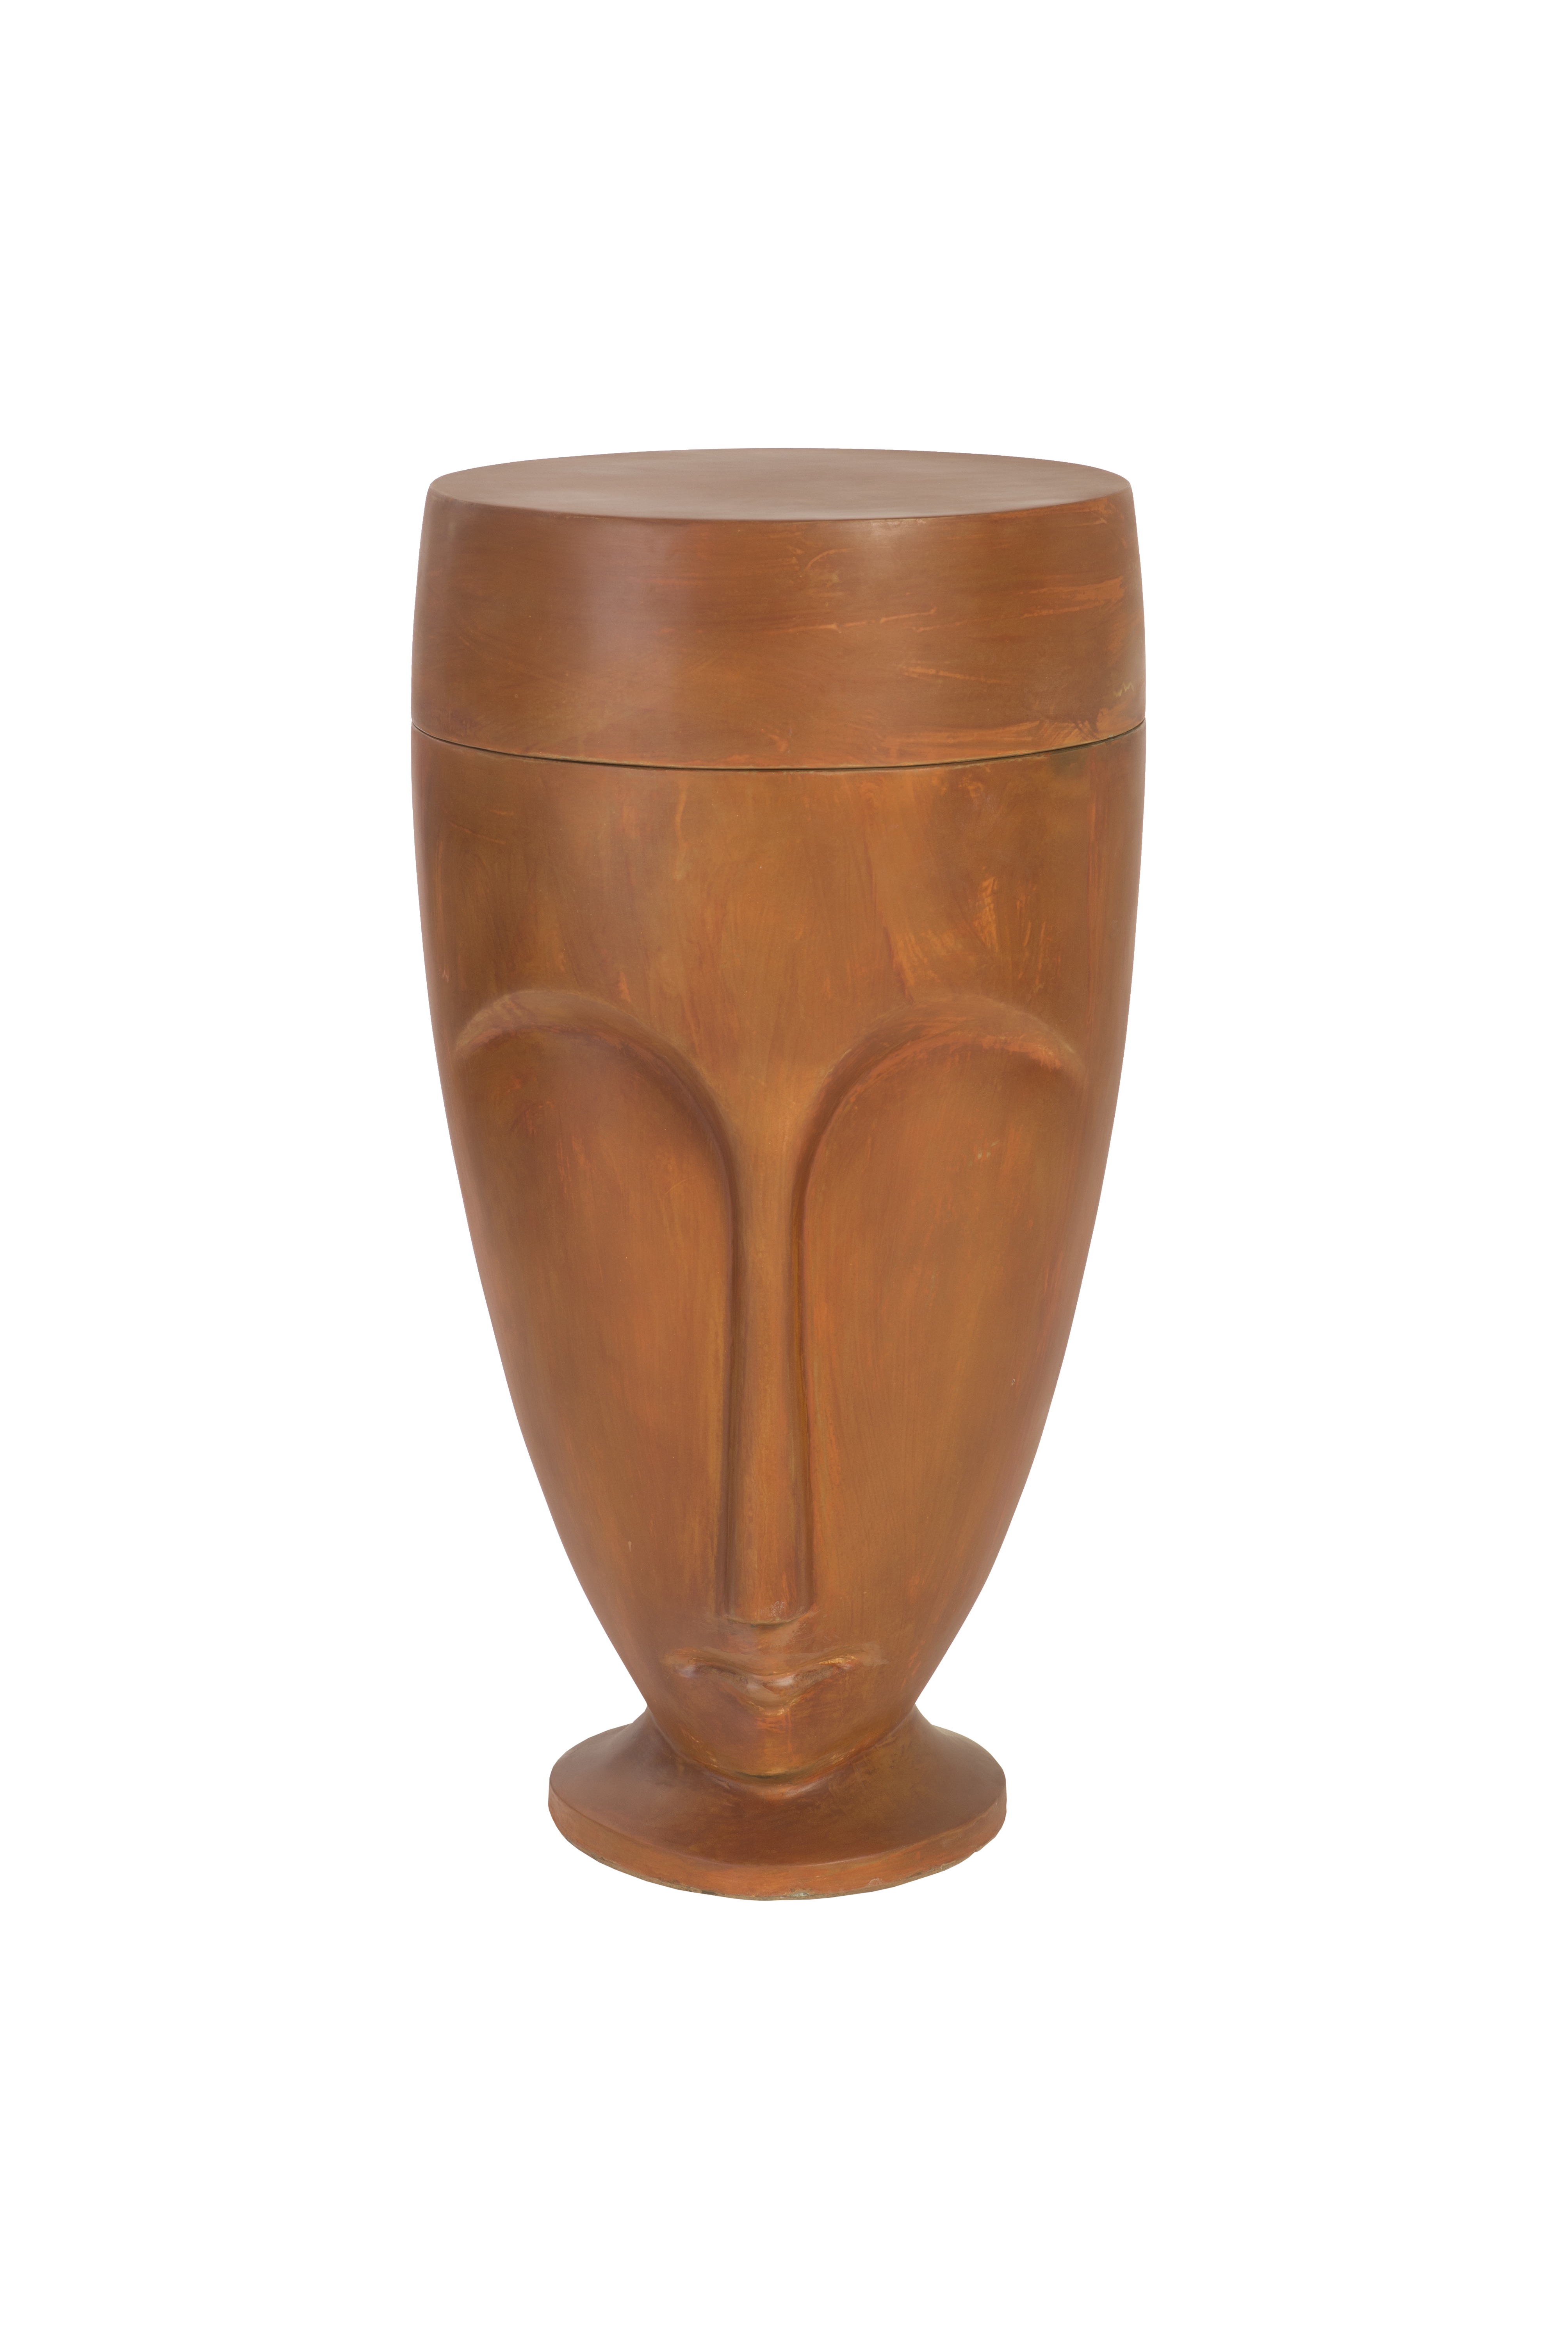 Phillips Collection face tower pedestal